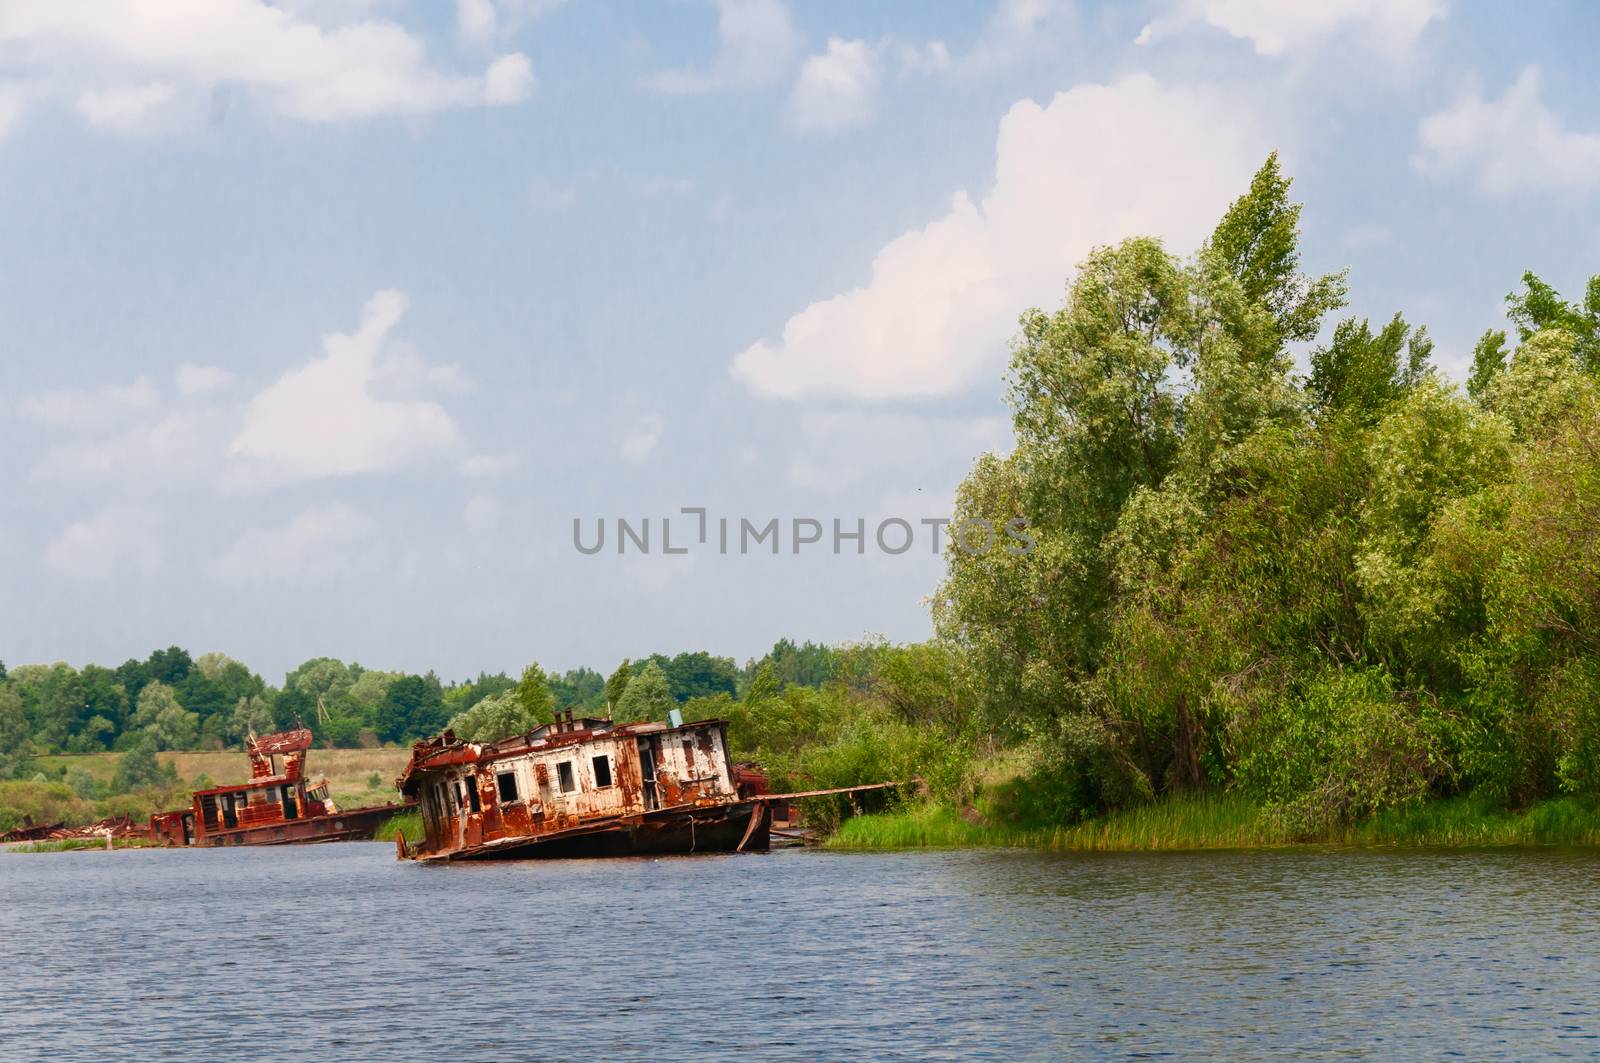 Wrecked abandoned ship on a river by iryna_rasko